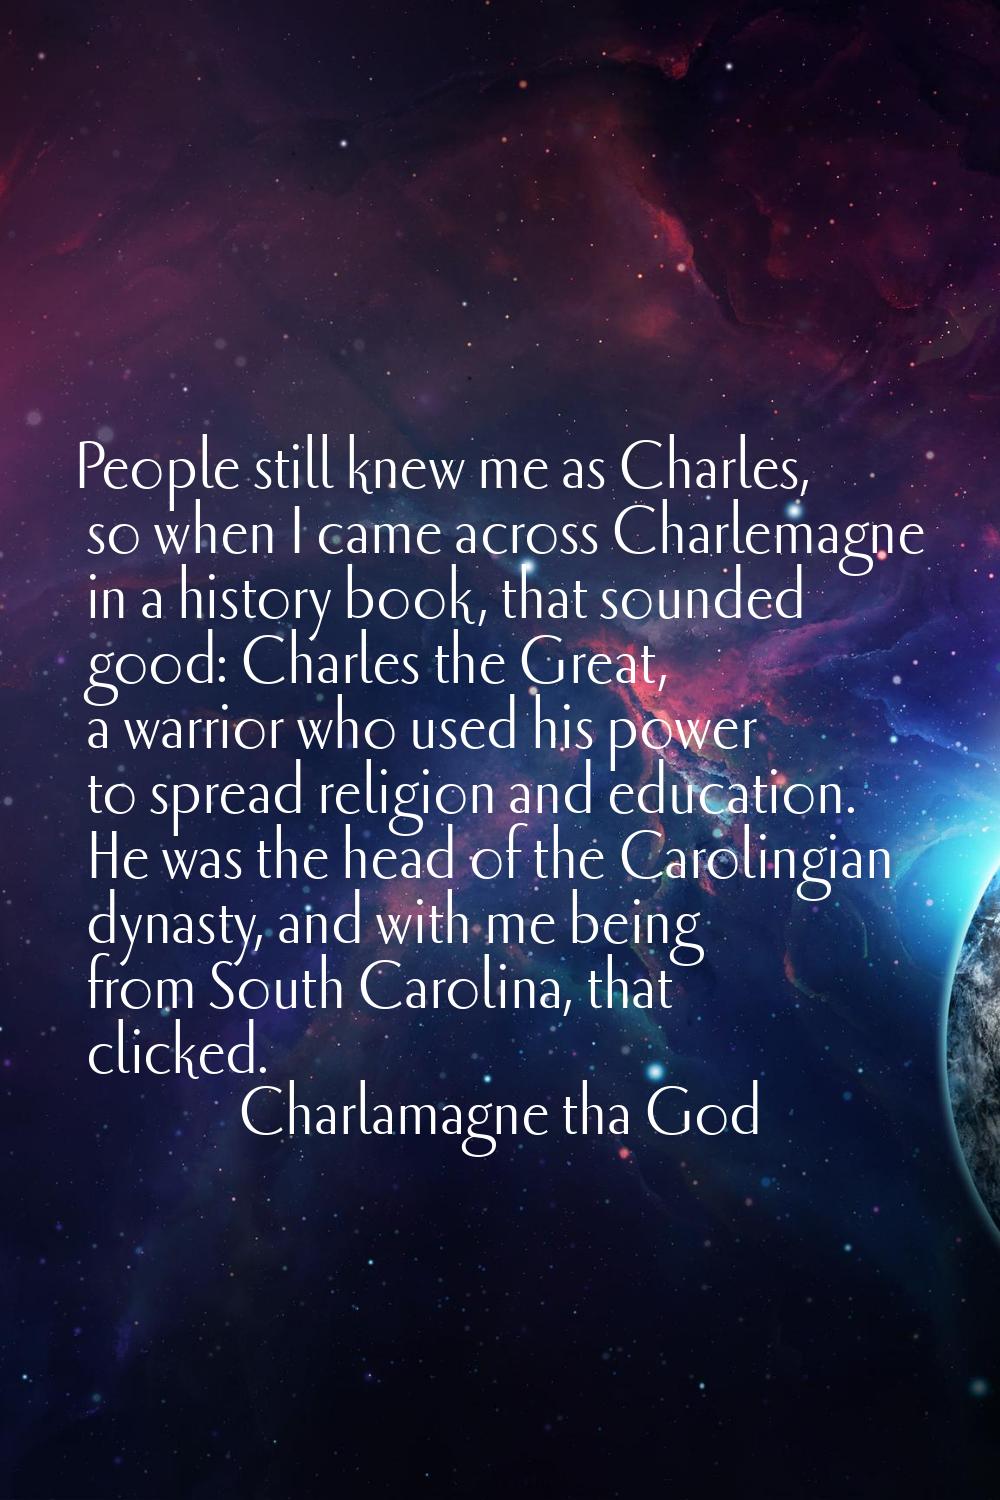 People still knew me as Charles, so when I came across Charlemagne in a history book, that sounded 